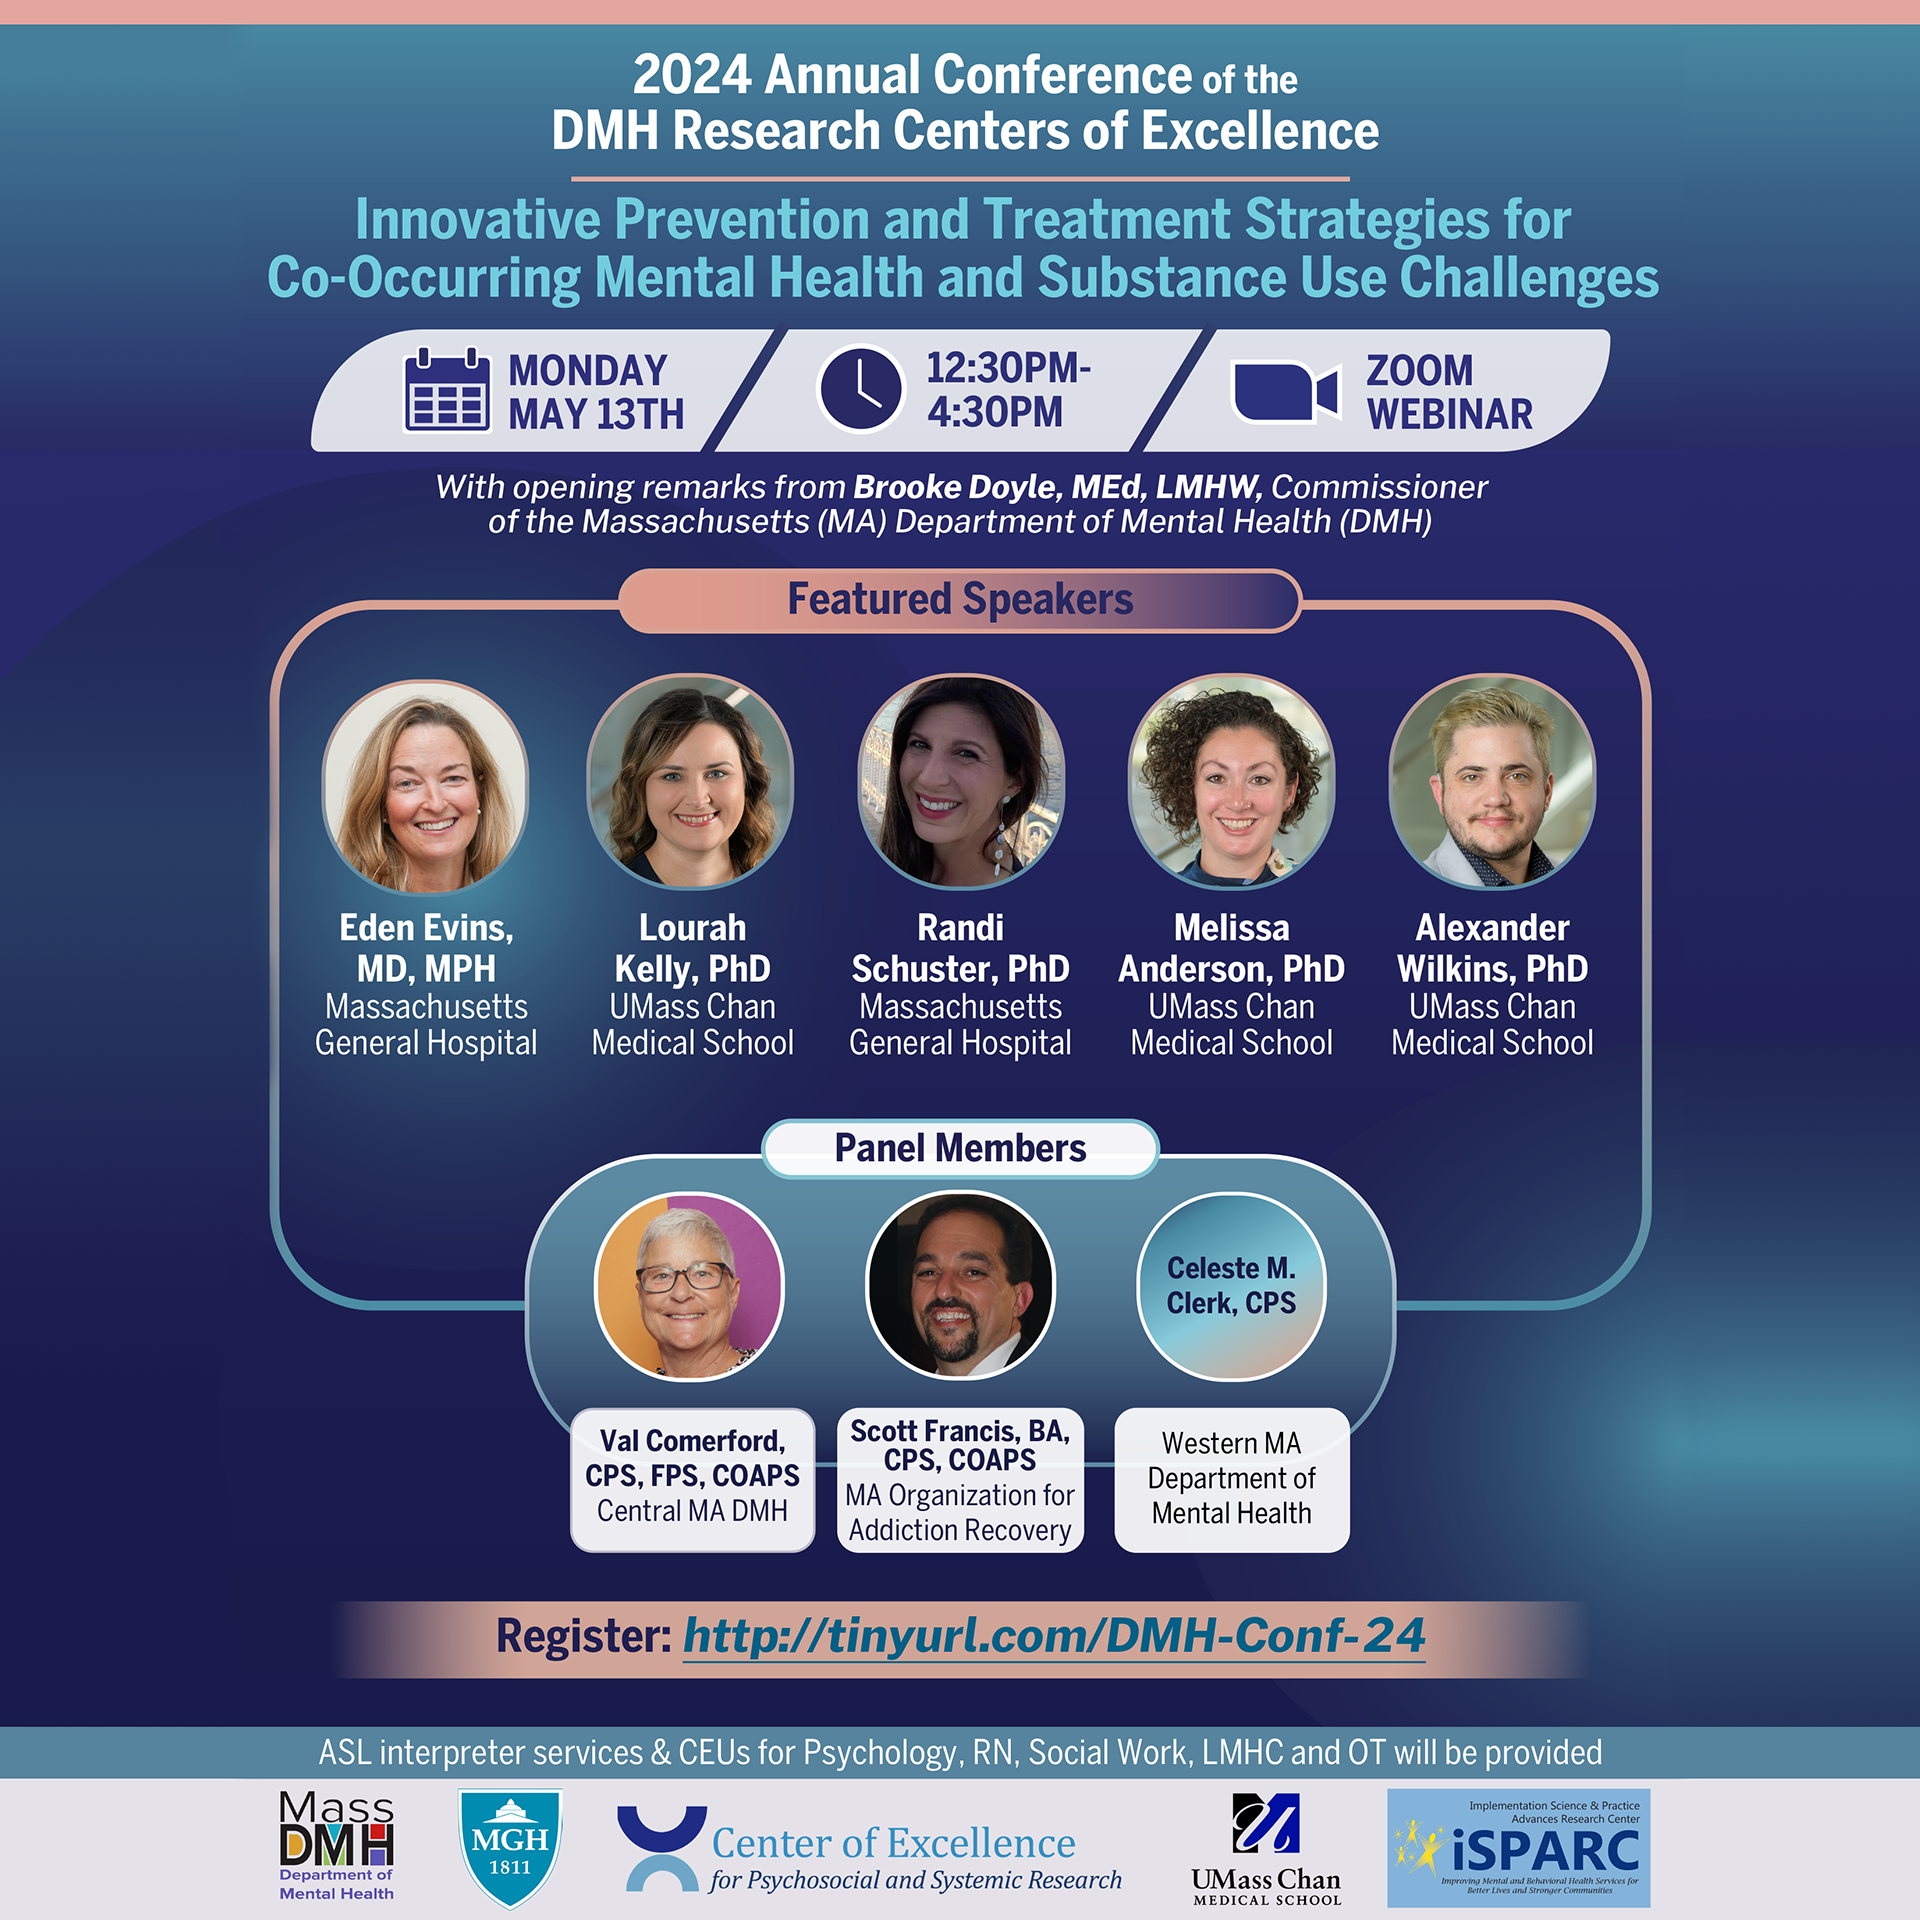 2024 Annual DMH Conference is May 13 from 12:30 to 4:30 via zoom